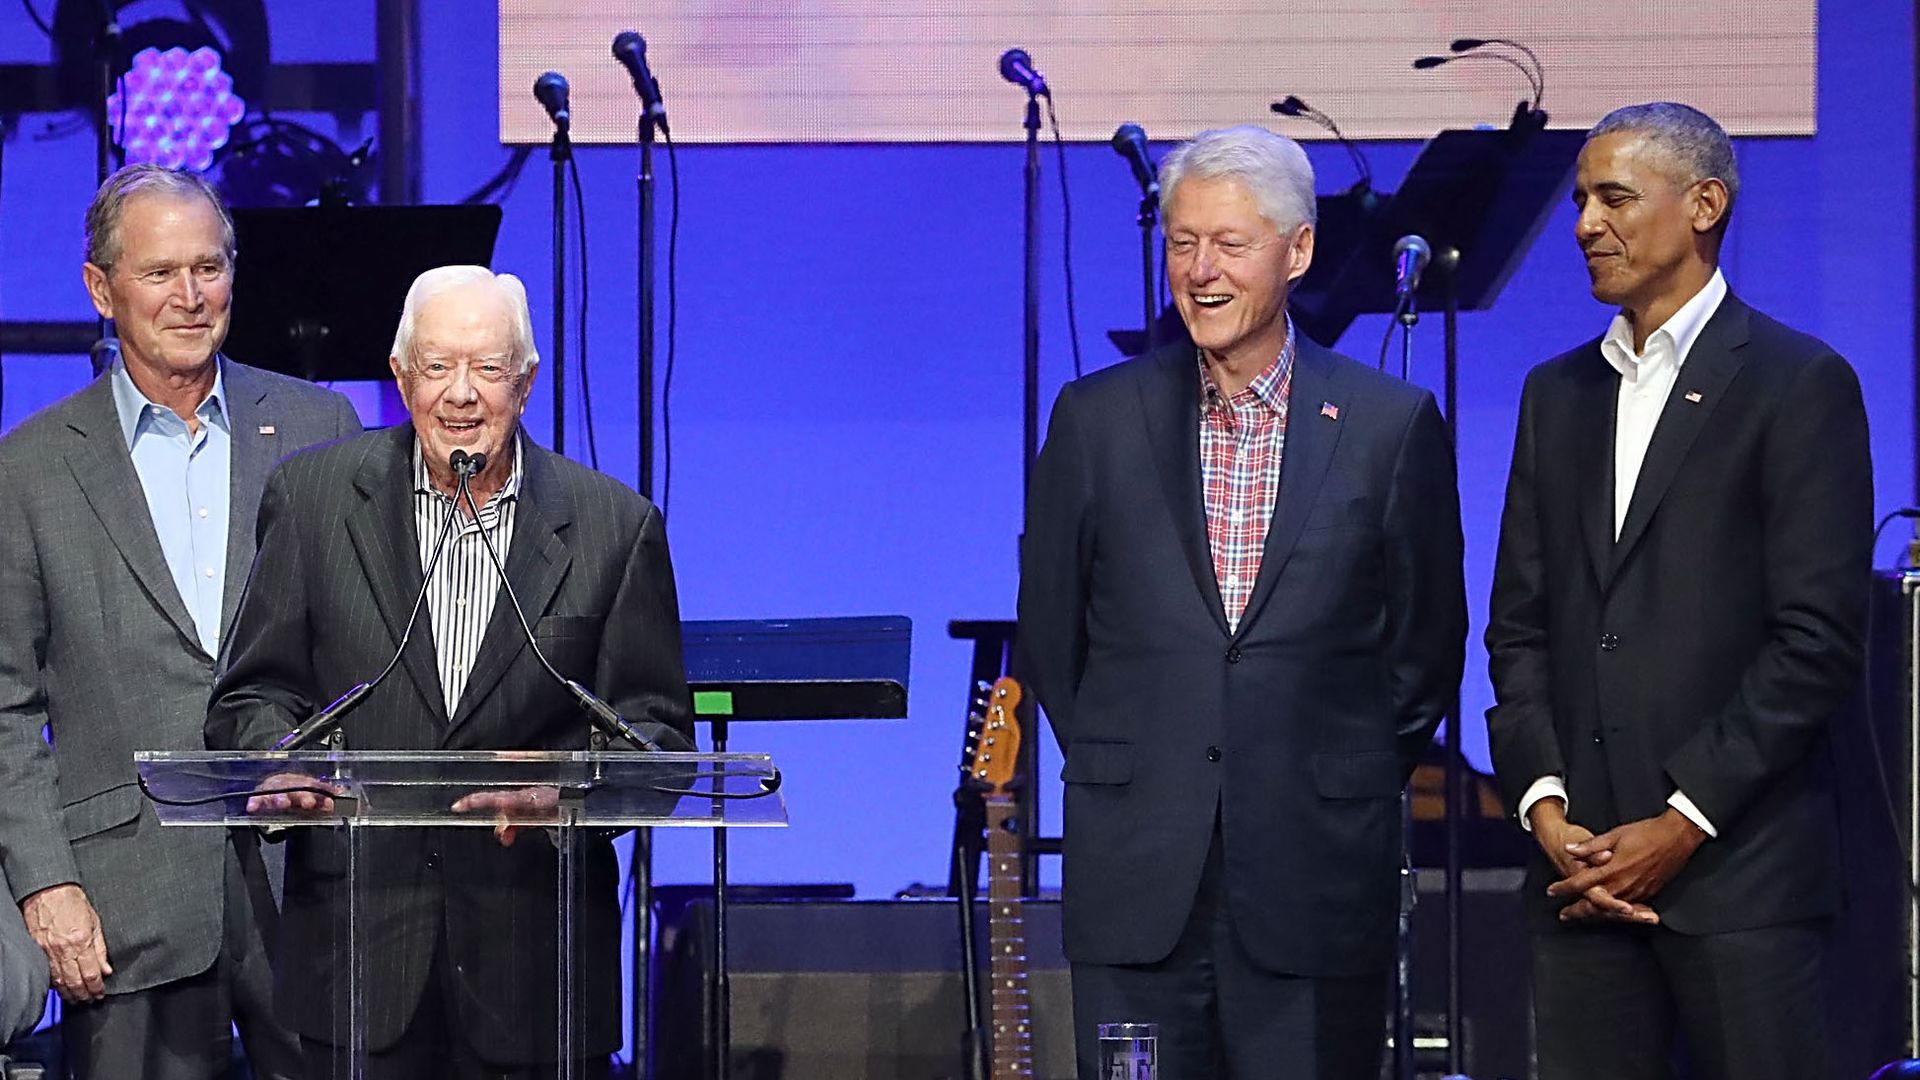 Former United States Presidents George H.W. Bush, George W. Bush, Jimmy Carter, Bill Clinton and Barack Obama at a concert at Reed Arena on October 21, 2017 in College Station, Texas.